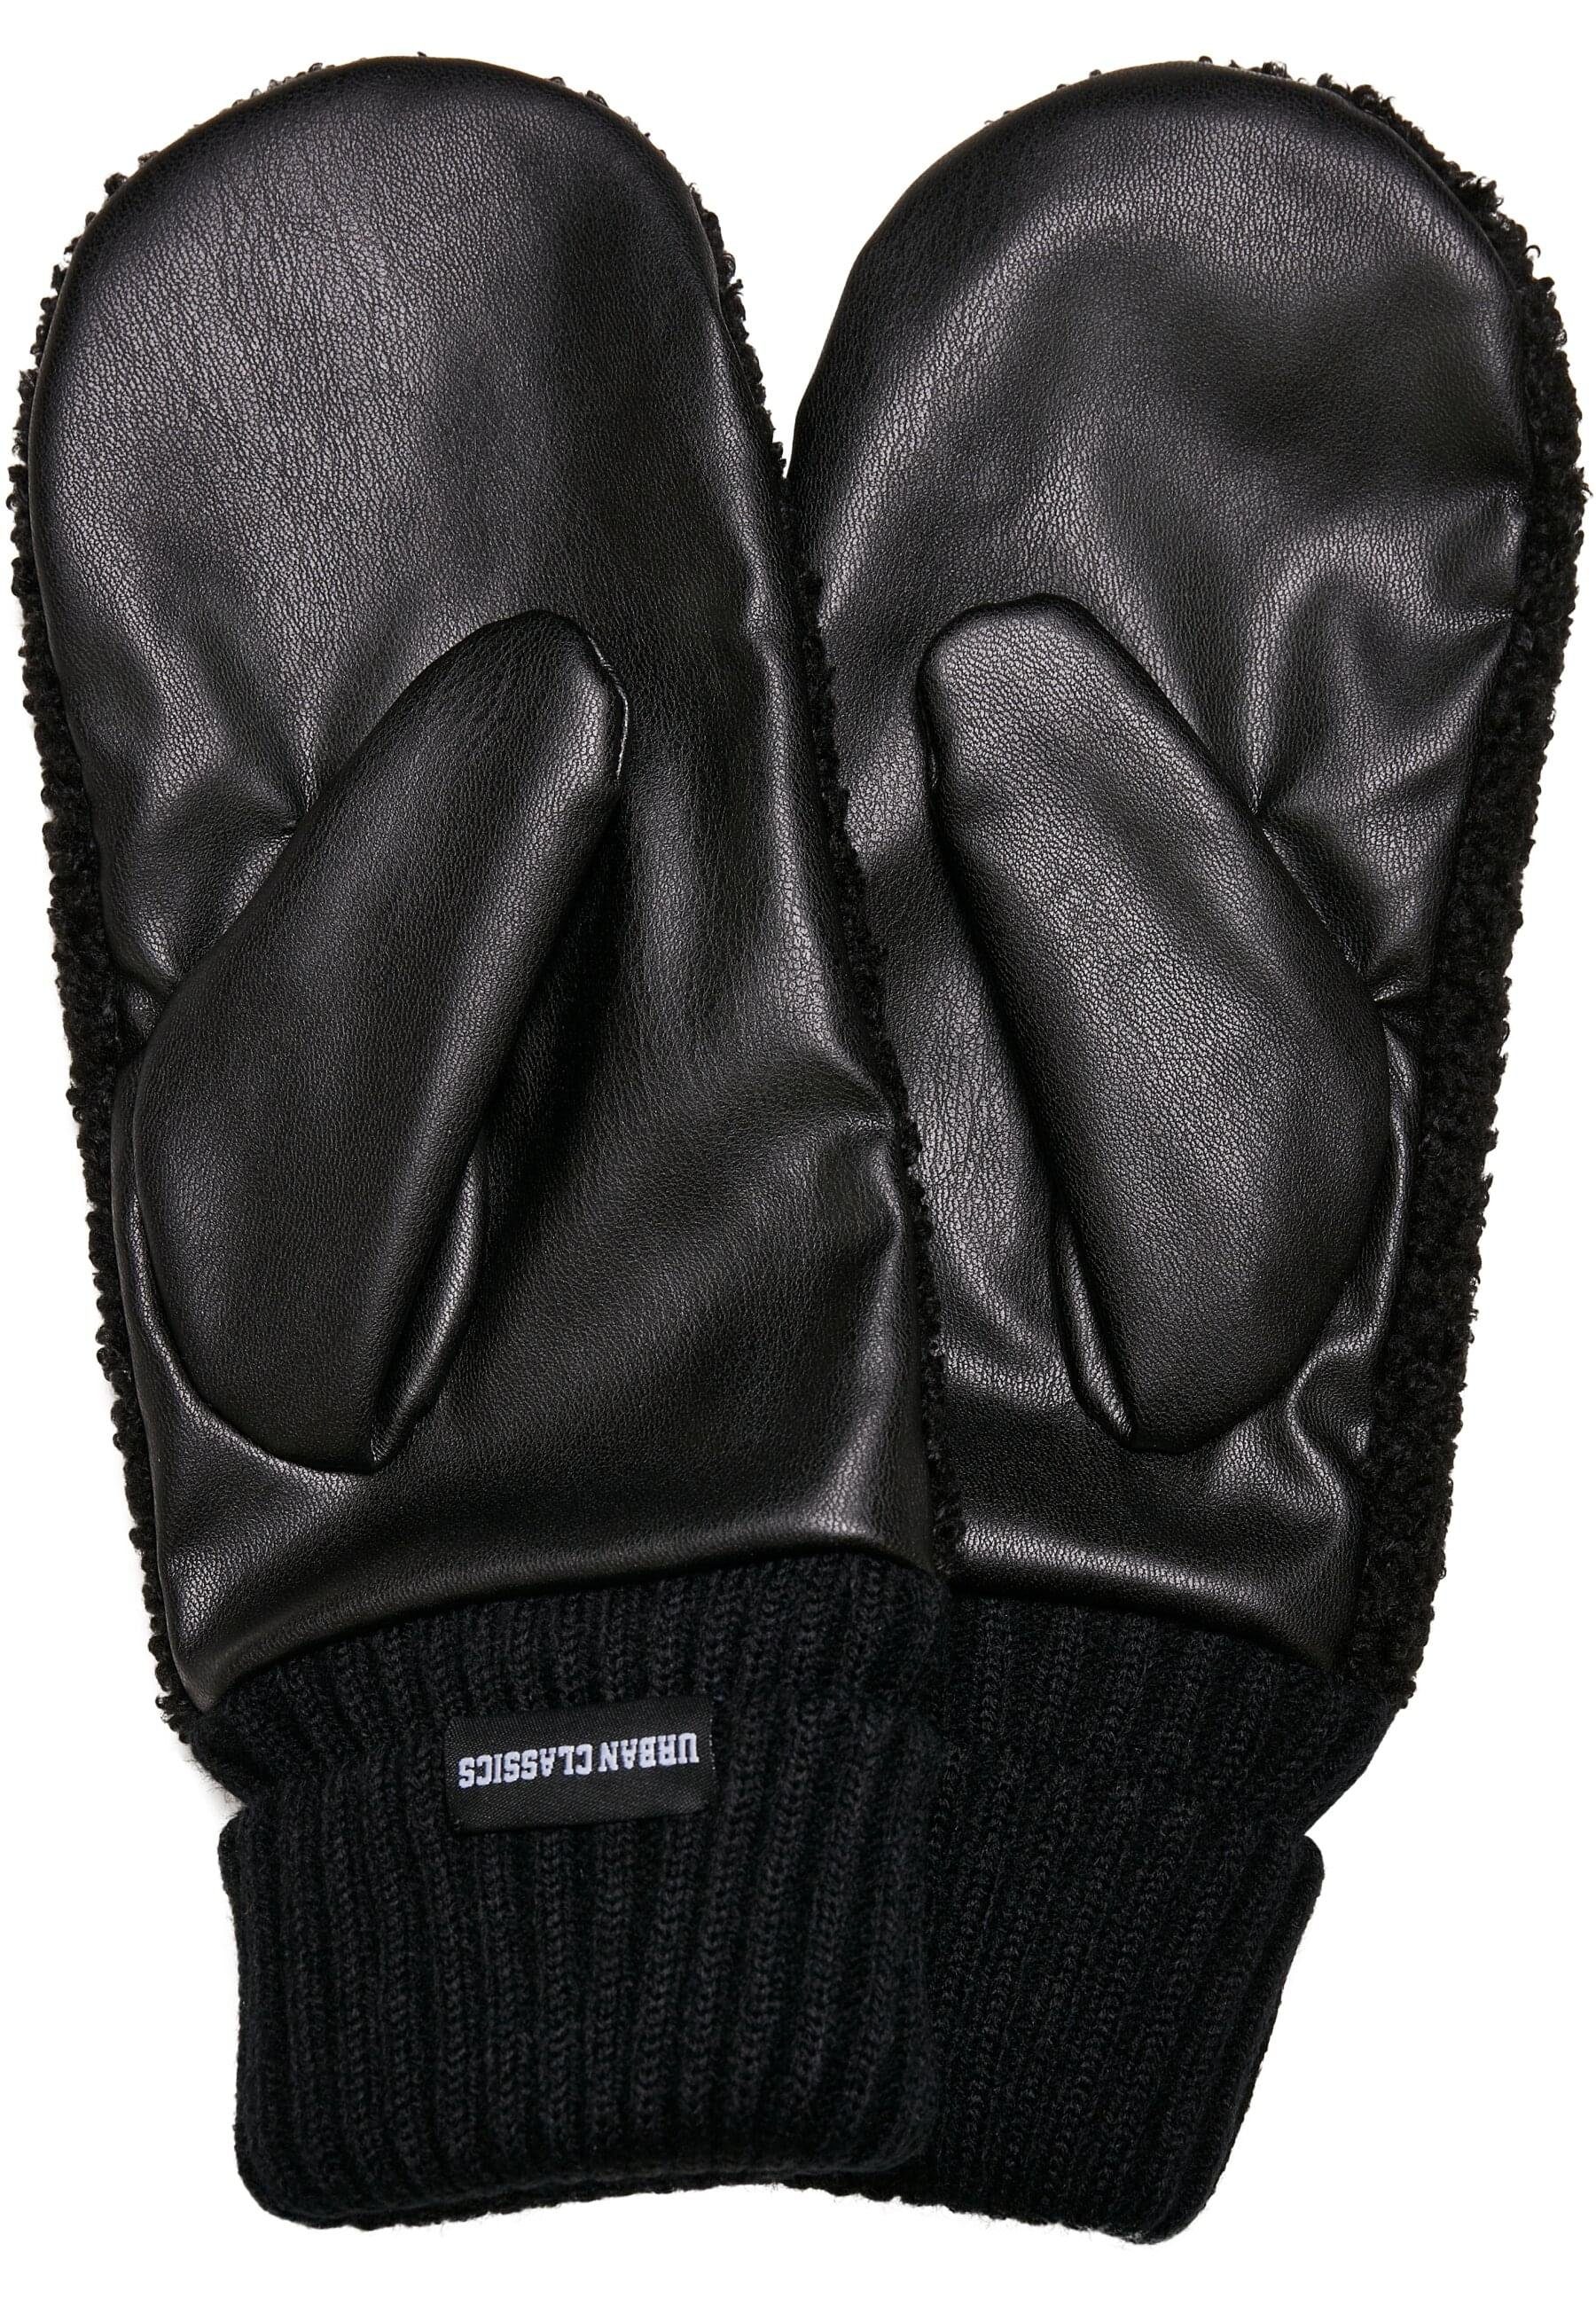 URBAN CLASSICS Baumwollhandschuhe Synthetic Unisex Sherpa Leather Gloves